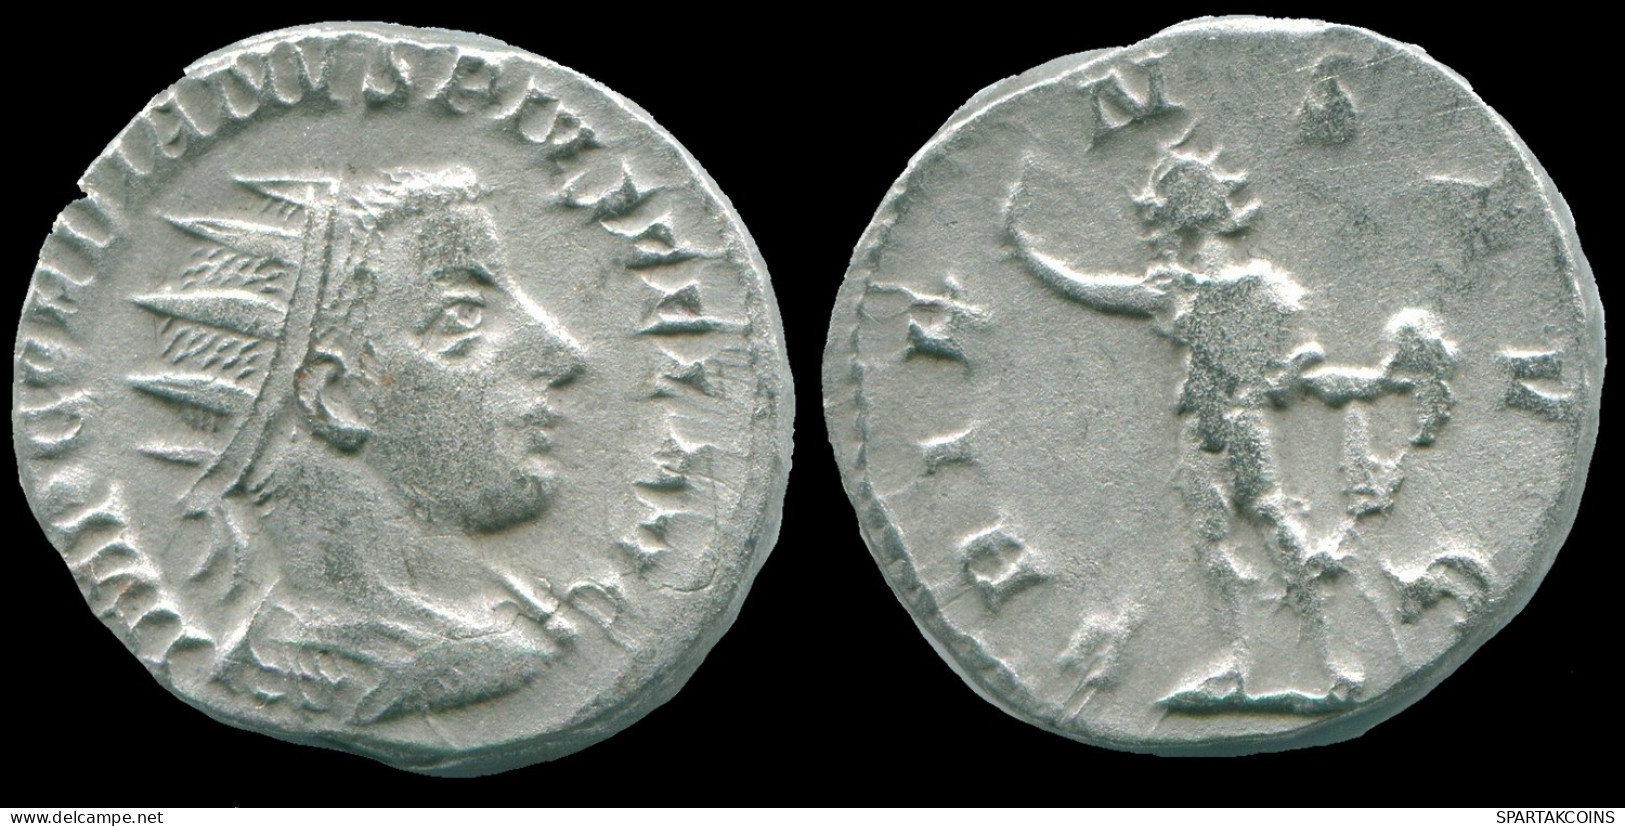 GORDIAN III AR ANTONINIANUS ANTIOCH Mint AD 243-244 ORIENS AVG #ANC13166.35.E.A - The Military Crisis (235 AD To 284 AD)